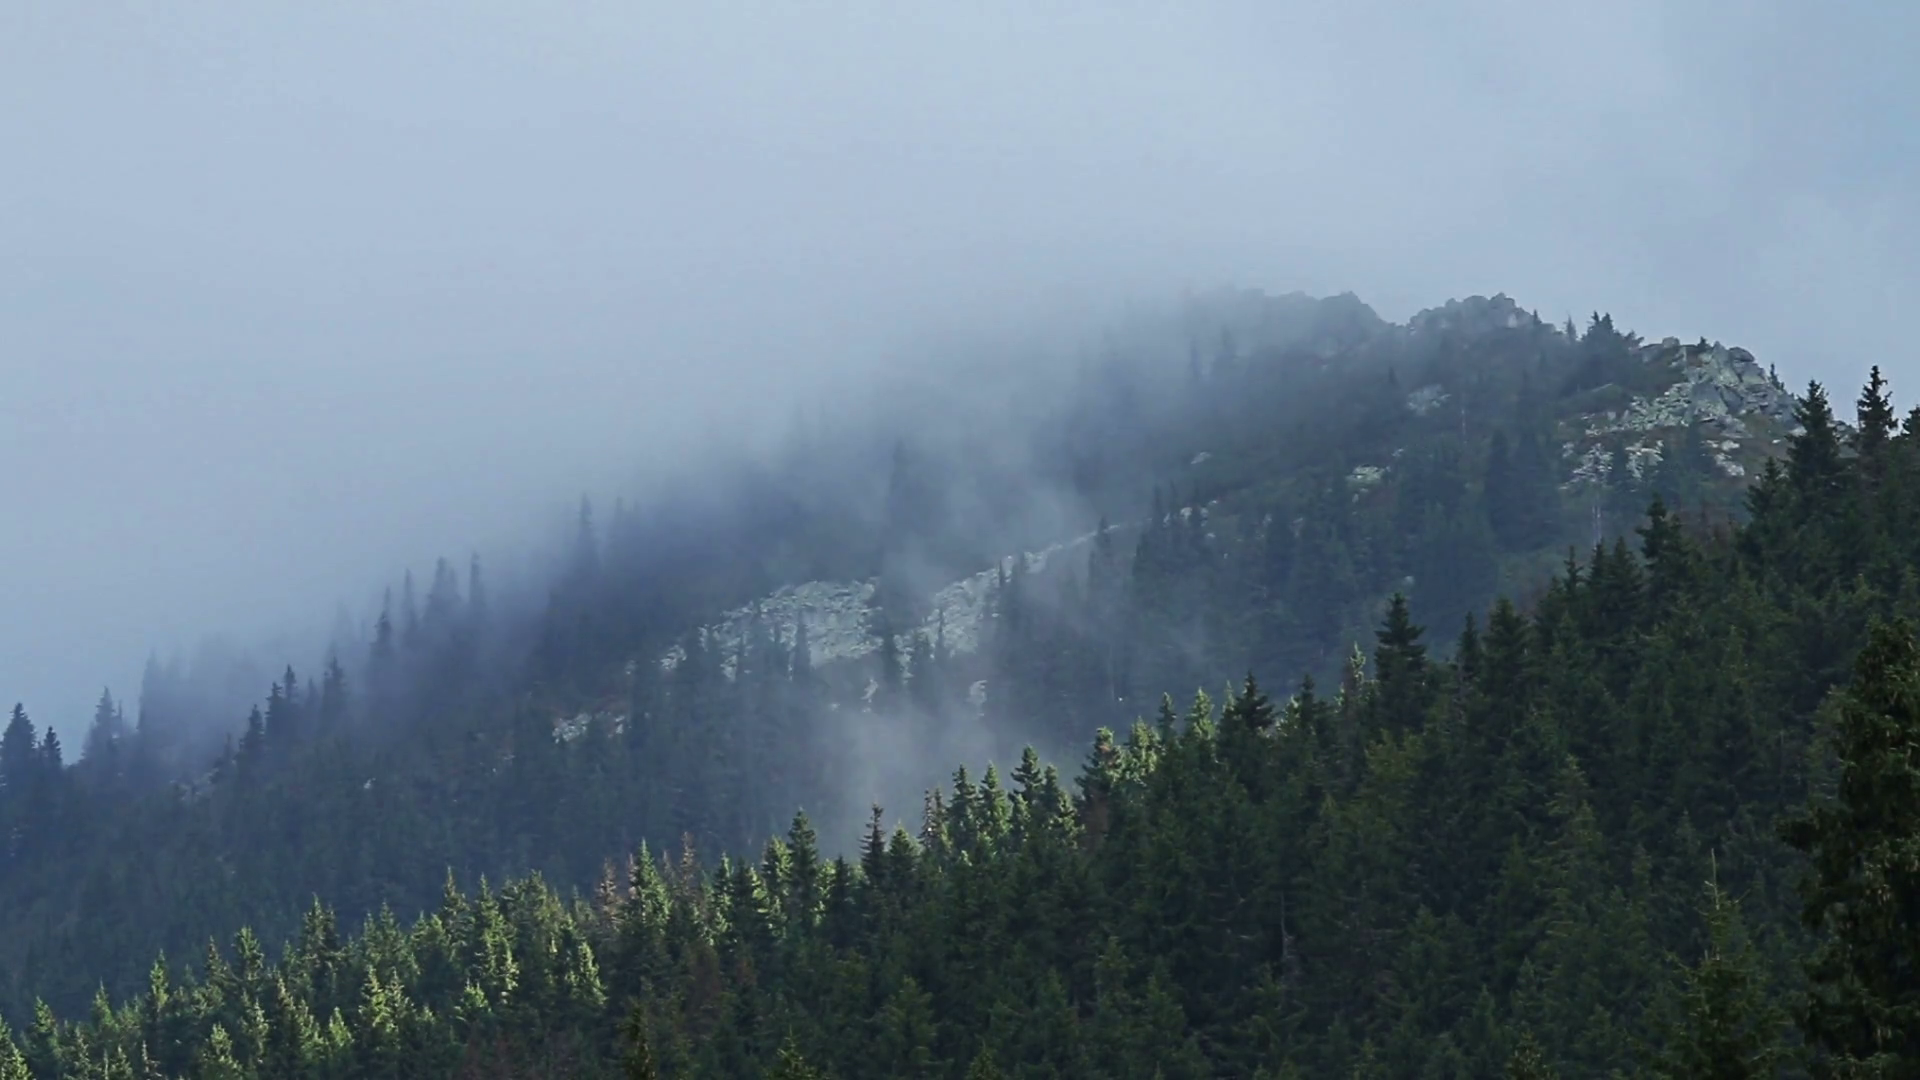 Time lapse of fog rolling in over the hills with pine tree forest ...